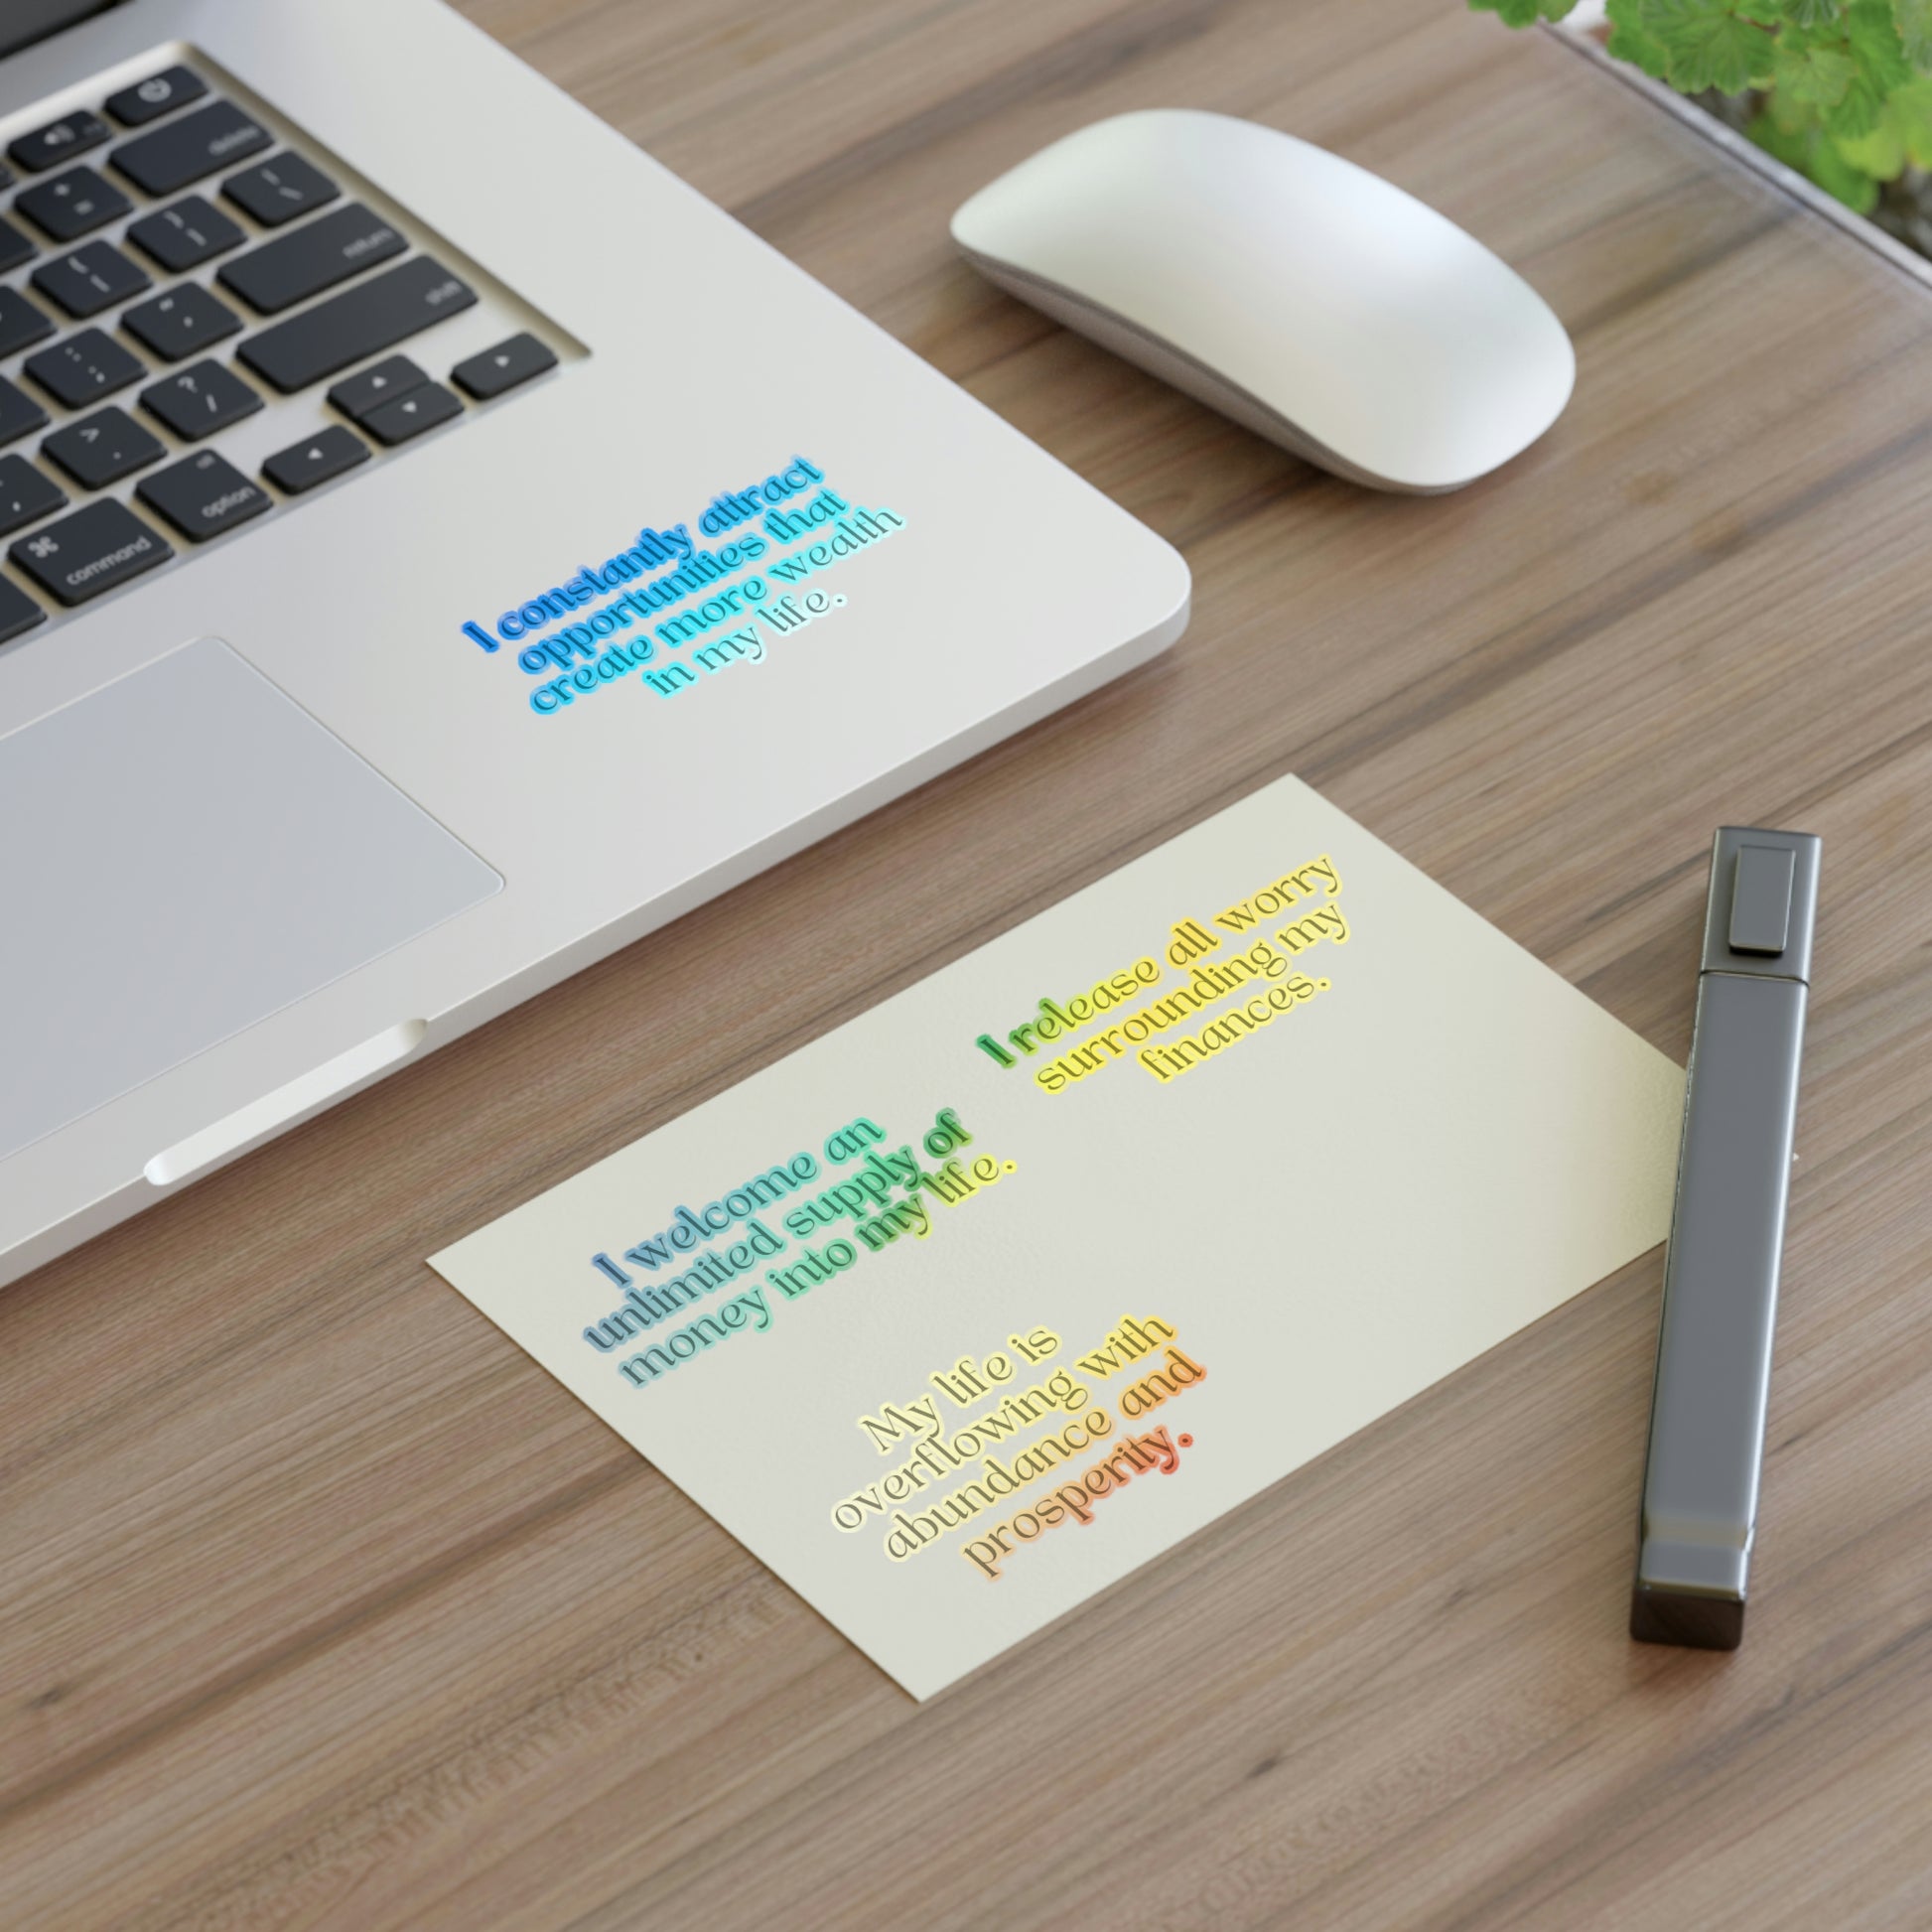 Affirmation word stickers holographic. Displayed on a desk and on laptop to subliminally manifest wealth and easily cultivate an abundance mindset. 